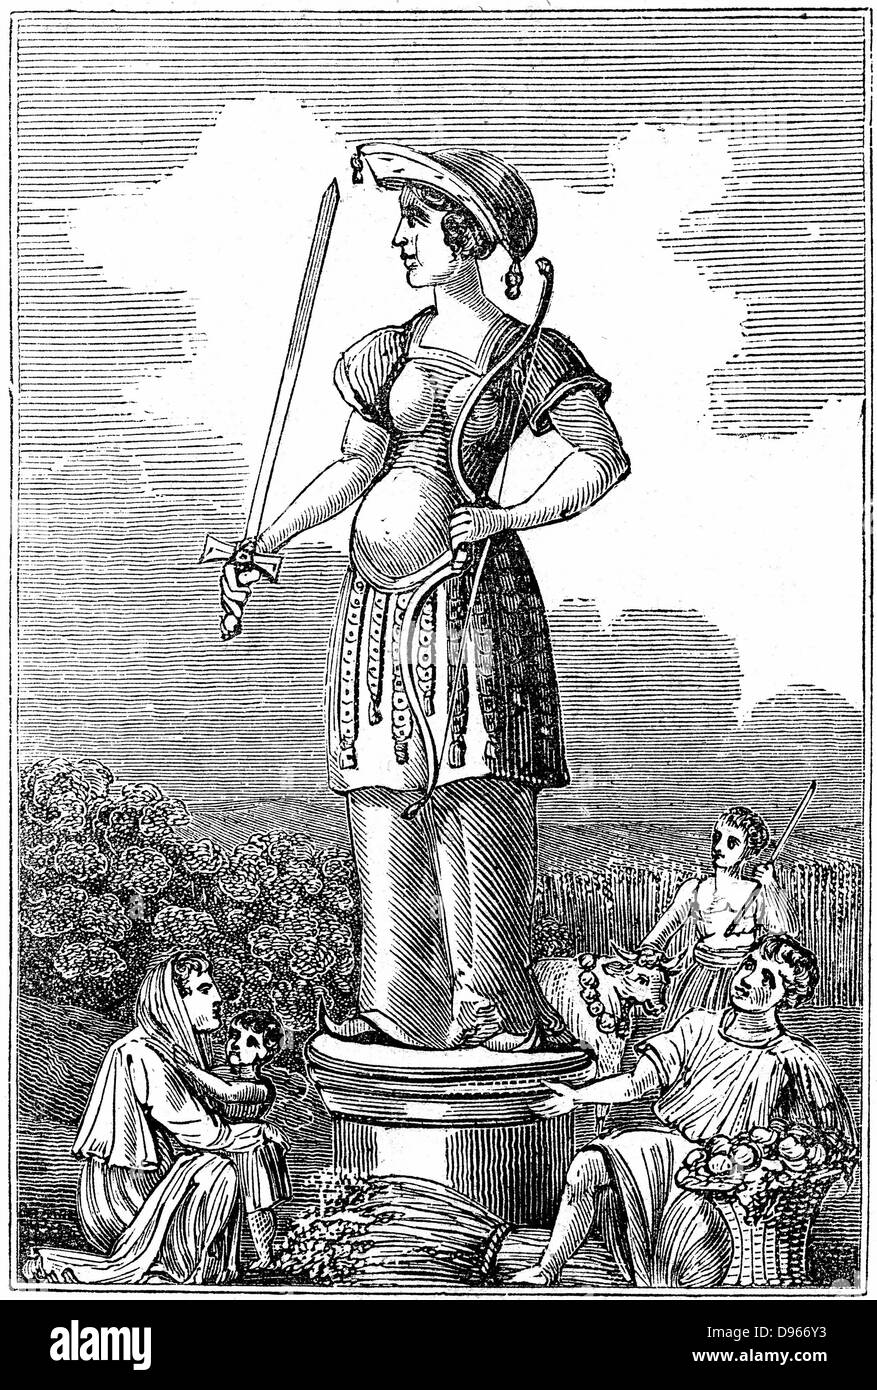 Freya or Frigg goddess of love in Scandinavian mythology, wife of Odin. Friday is named for her. Woodcut, London, 1834. Stock Photo